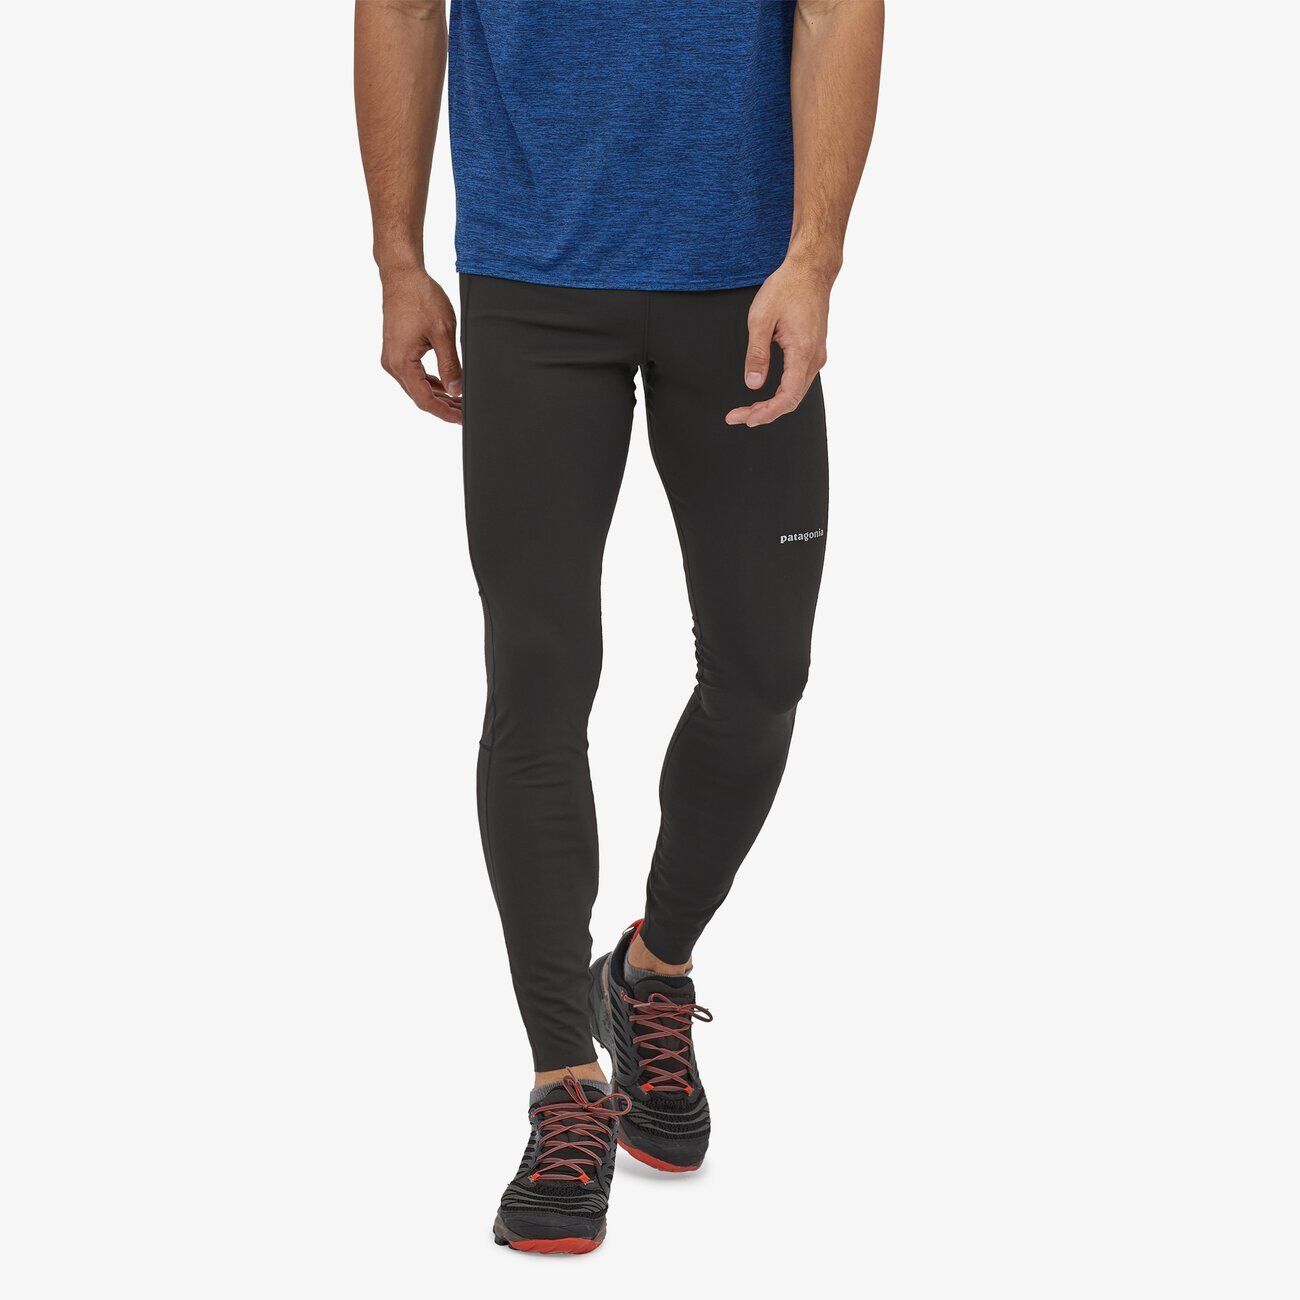 Patagonia Endless Run Tights - Collant running homme | Hardloop